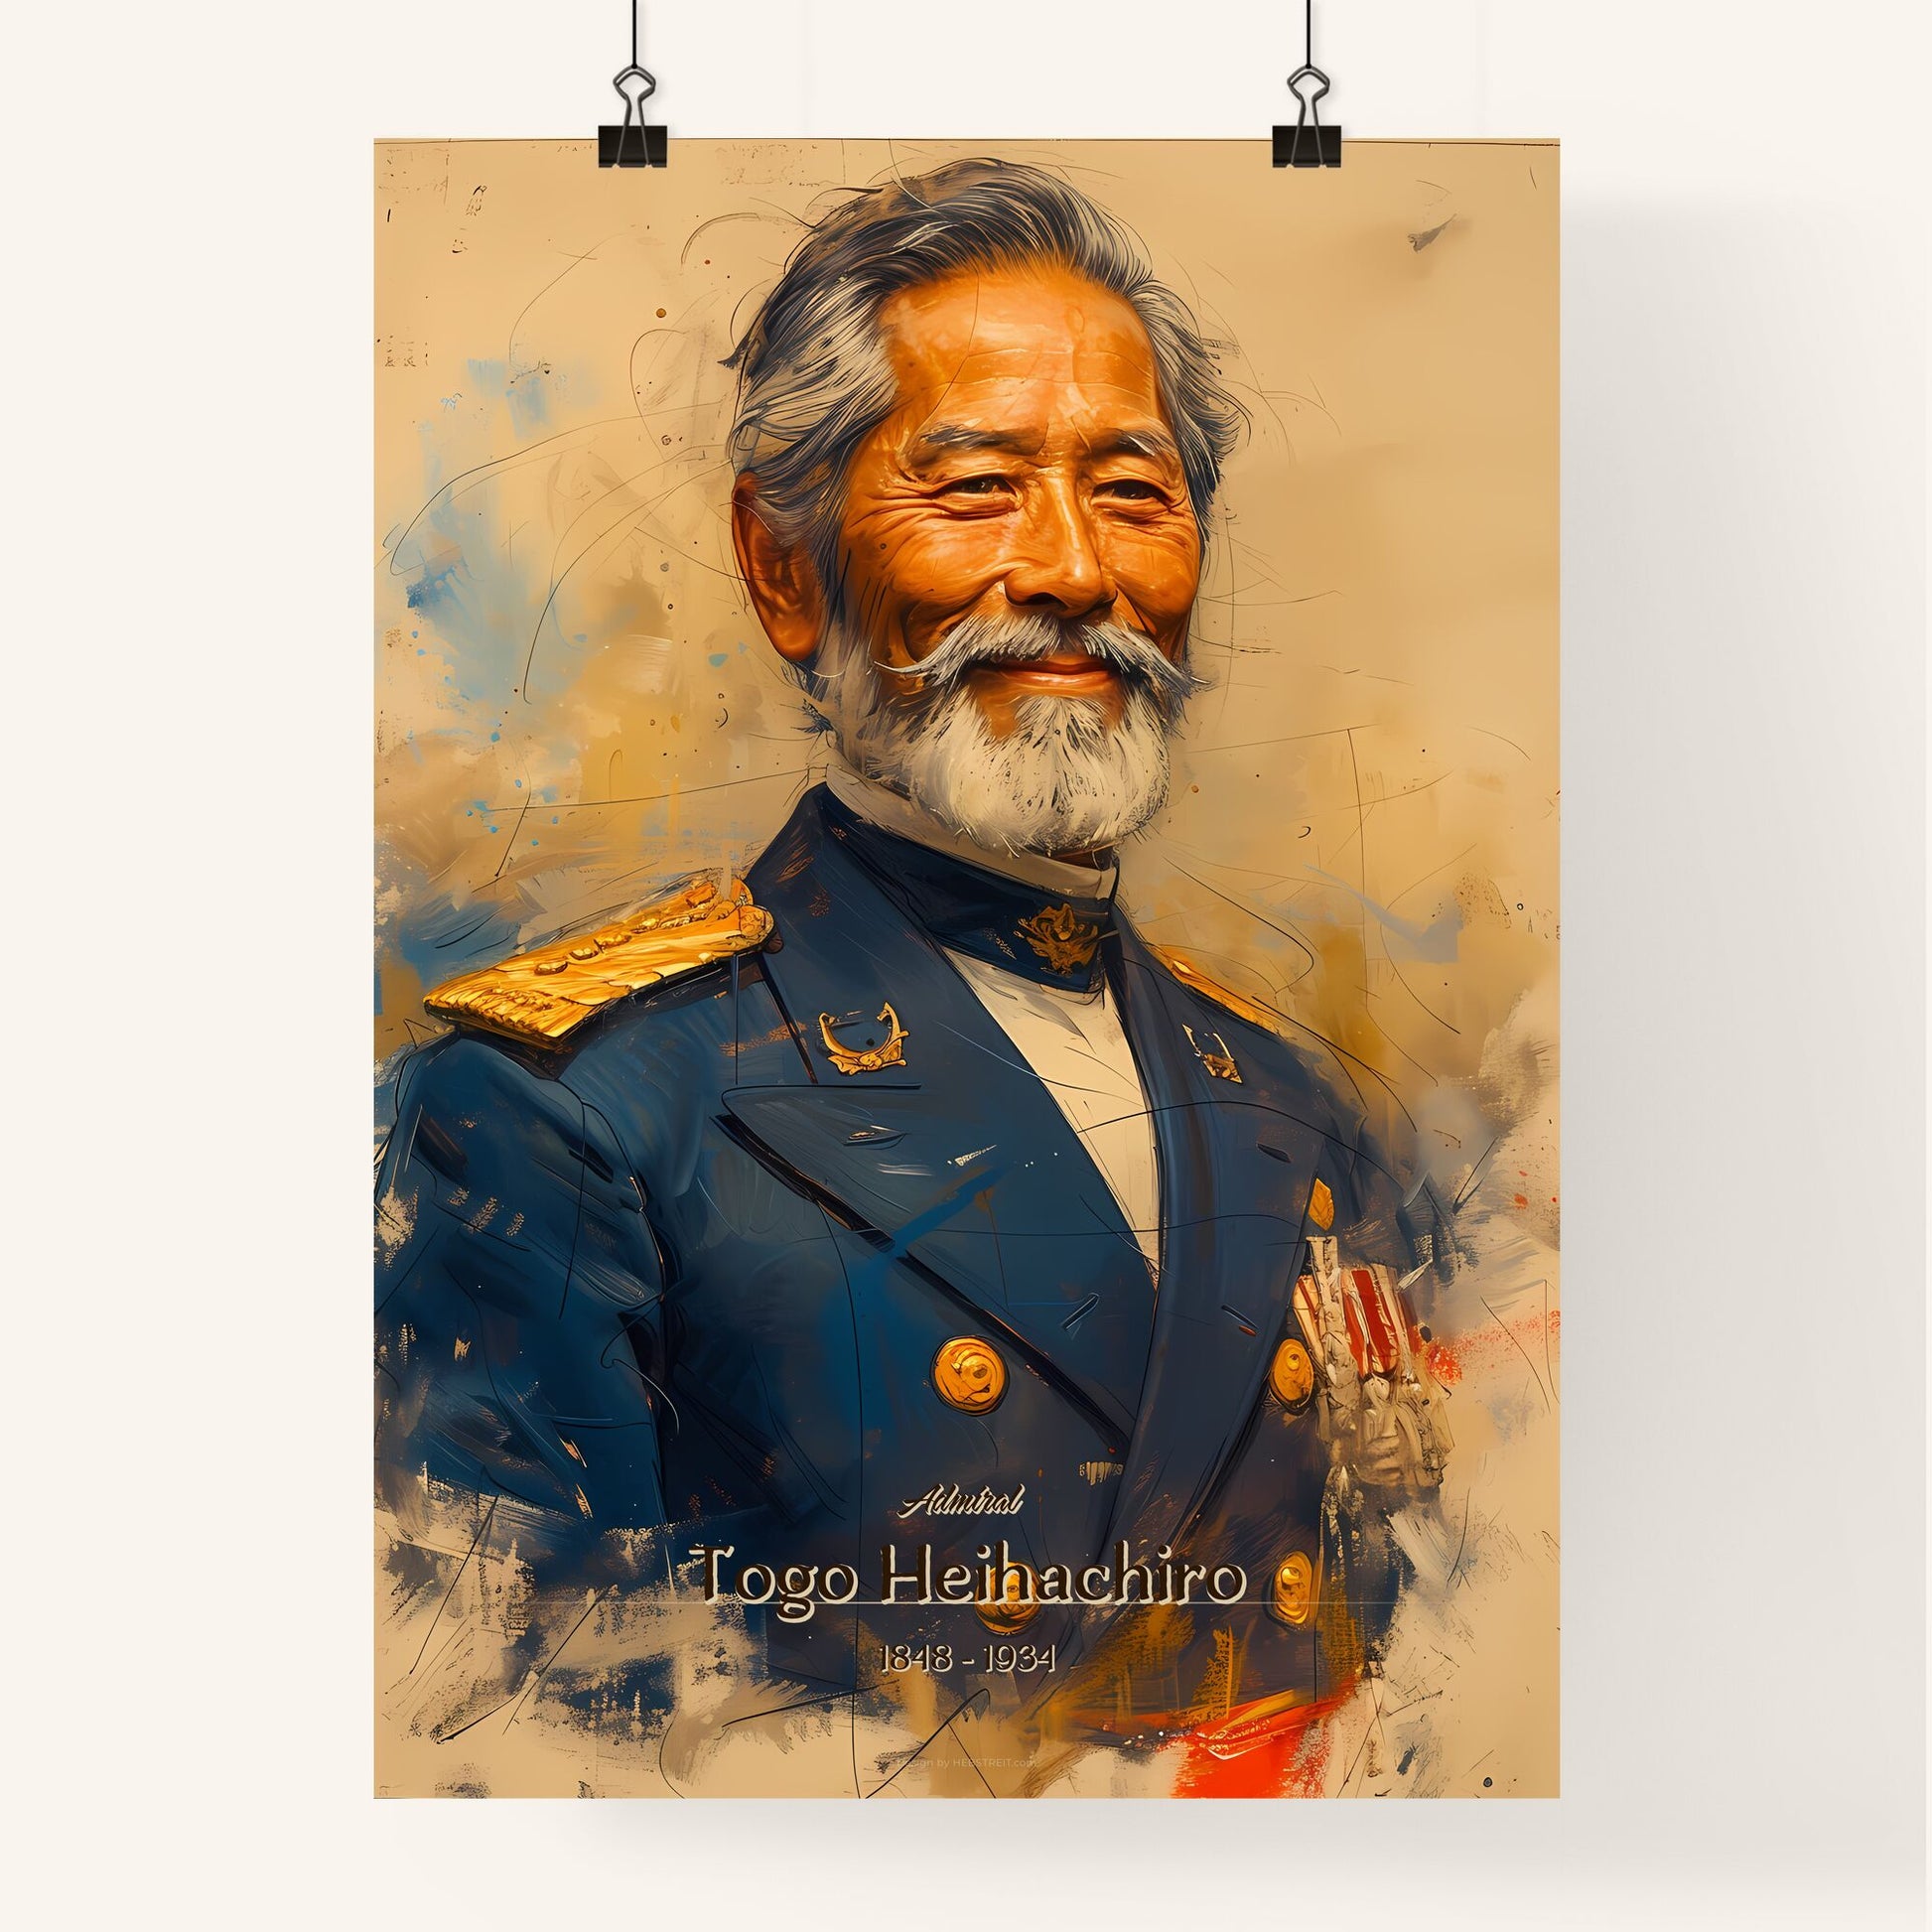 Admiral, Togo Heihachiro, 1848 - 1934, A Poster of a man in a military uniform Default Title